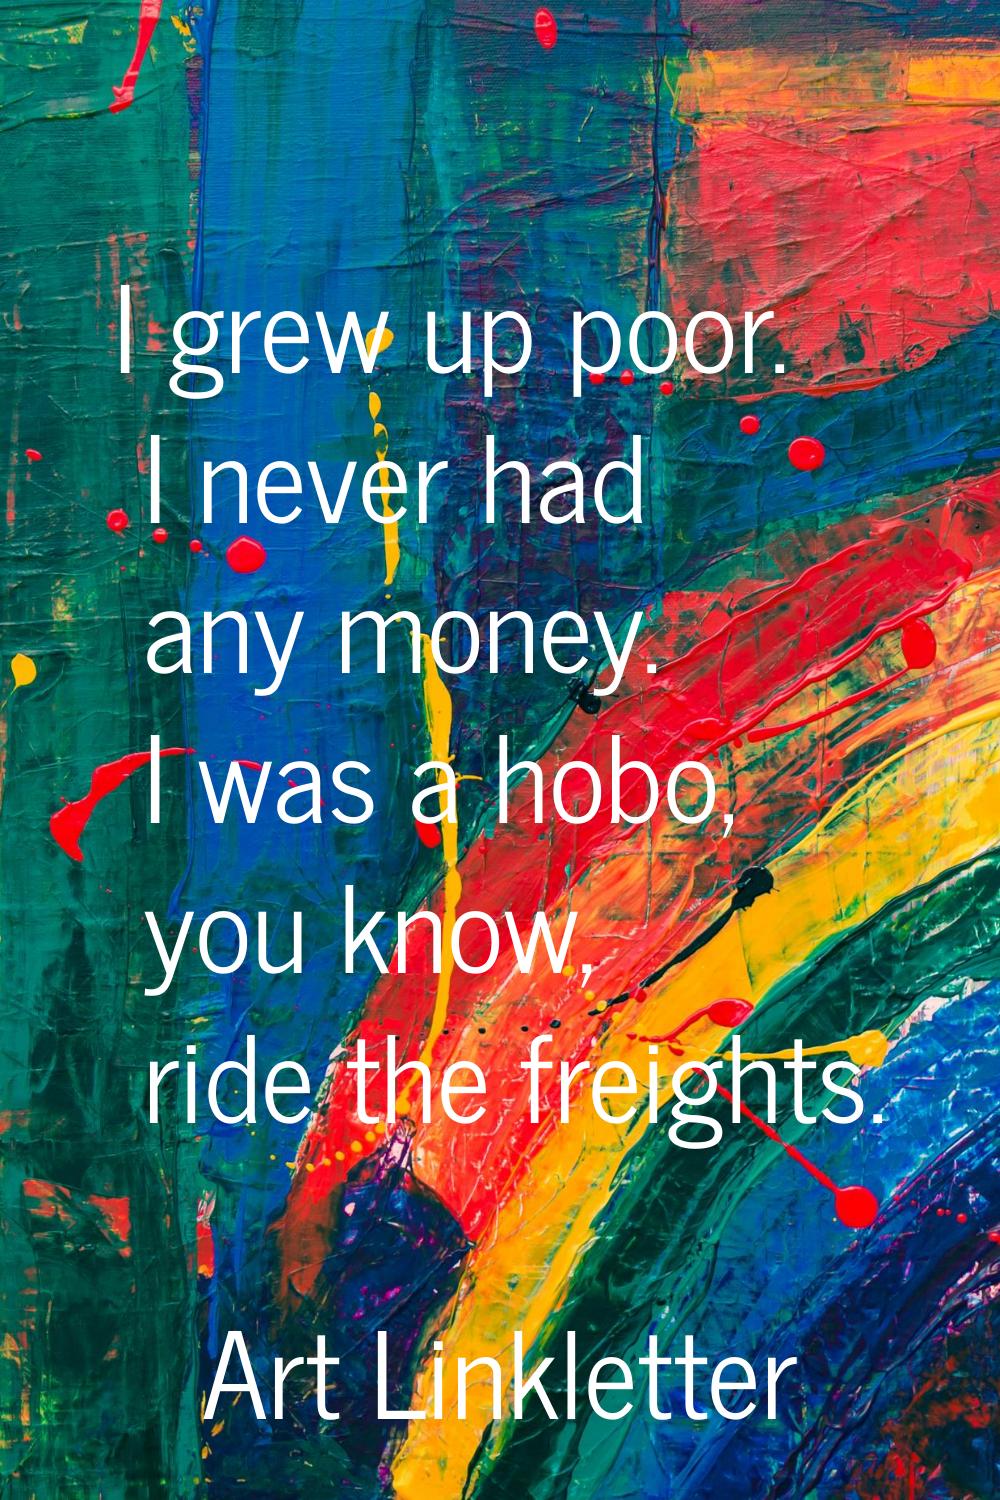 I grew up poor. I never had any money. I was a hobo, you know, ride the freights.